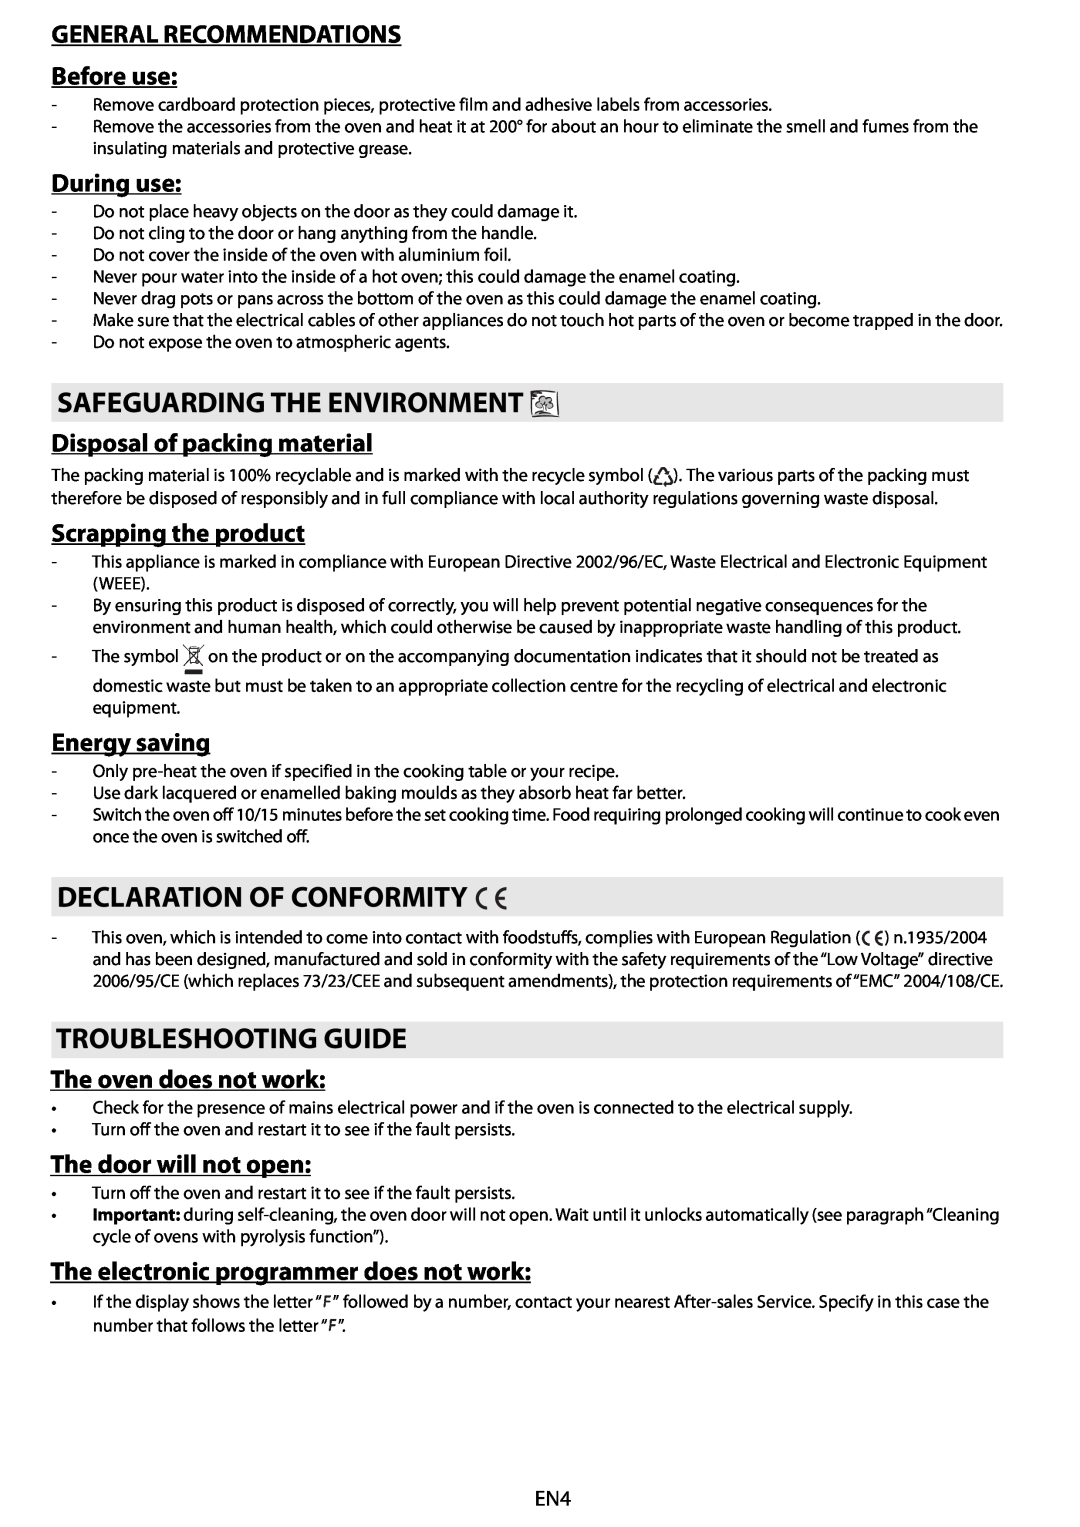 Whirlpool 663 Safeguarding The Environment, Declaration Of Conformity, Troubleshooting Guide, During use, Energy saving 